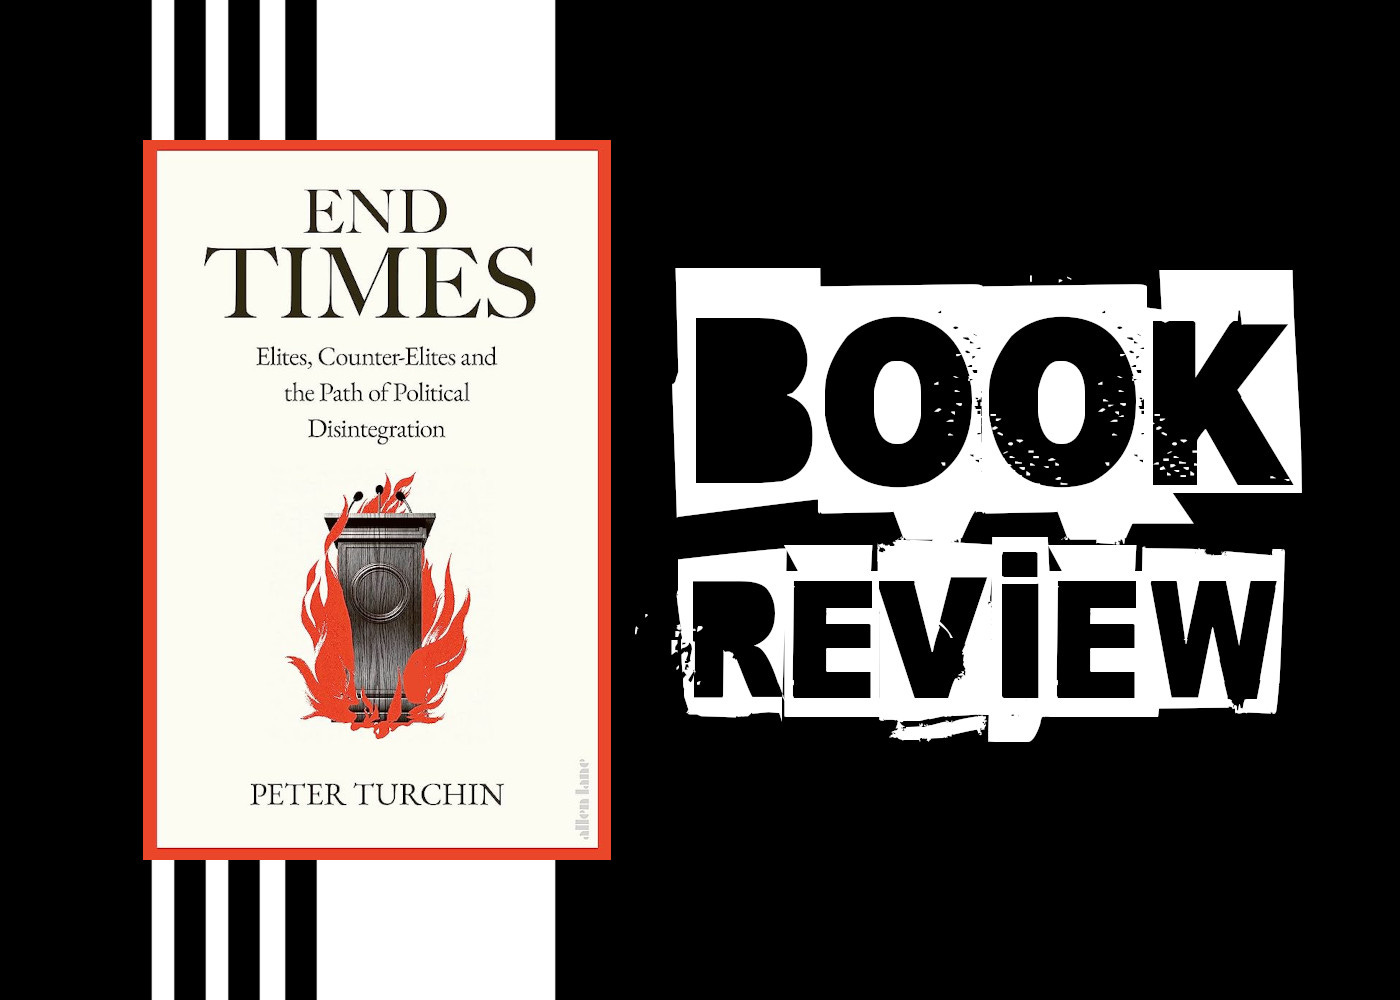 End Times: Elites, Counter-Elites, and the Path of Political Disintegration  by Peter Turchin